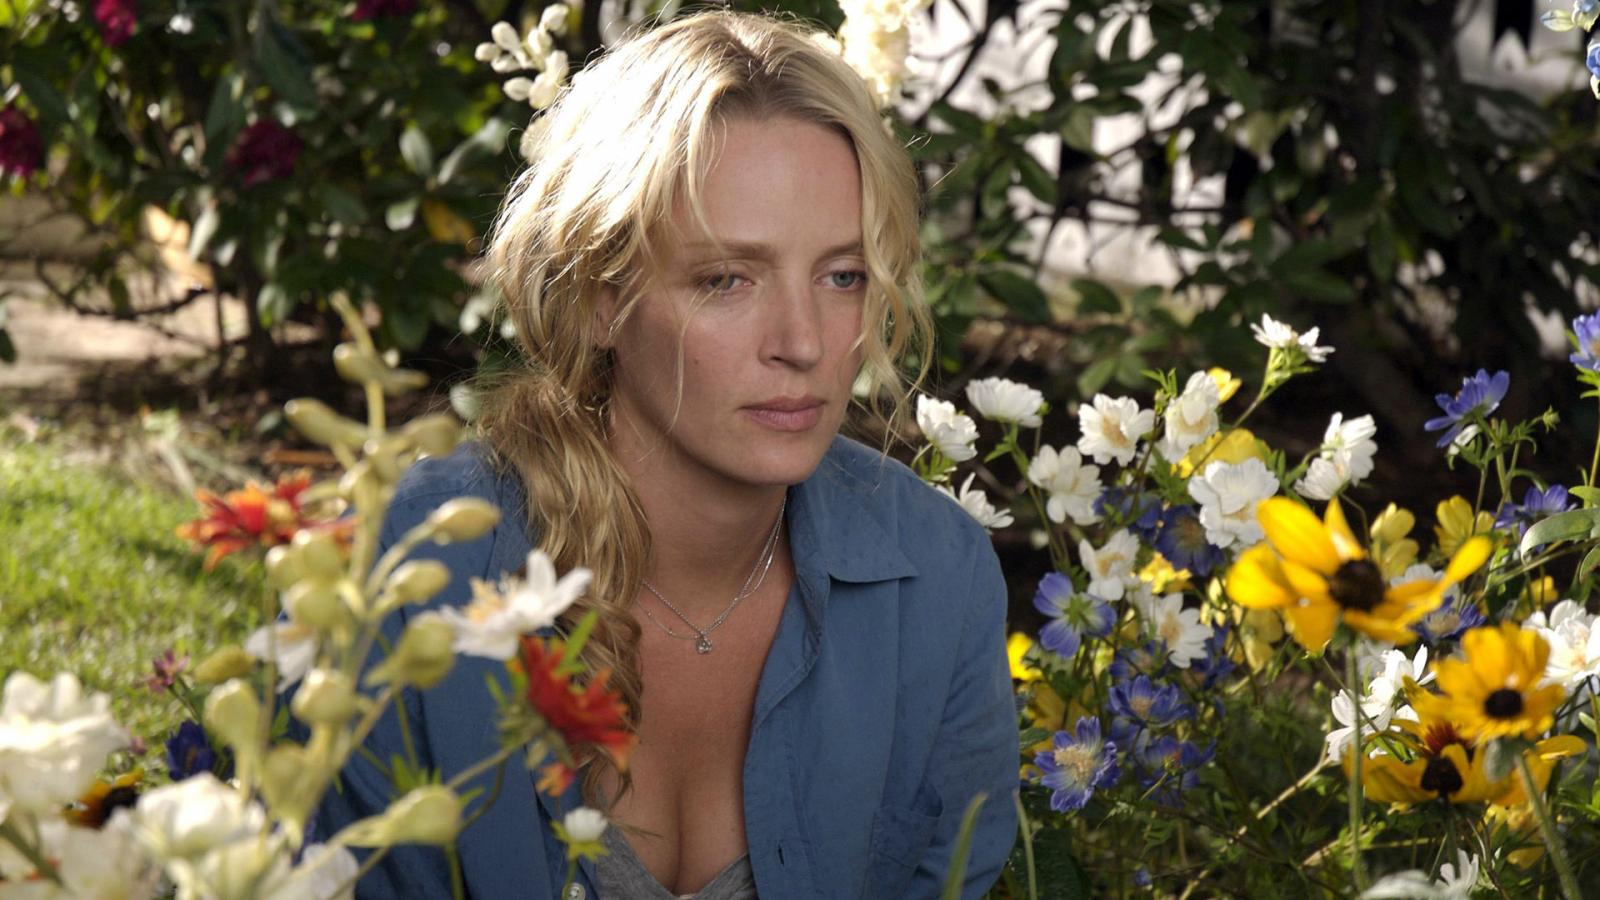 10 Underrated Uma Thurman Movies That Deserve More Credit - image 9